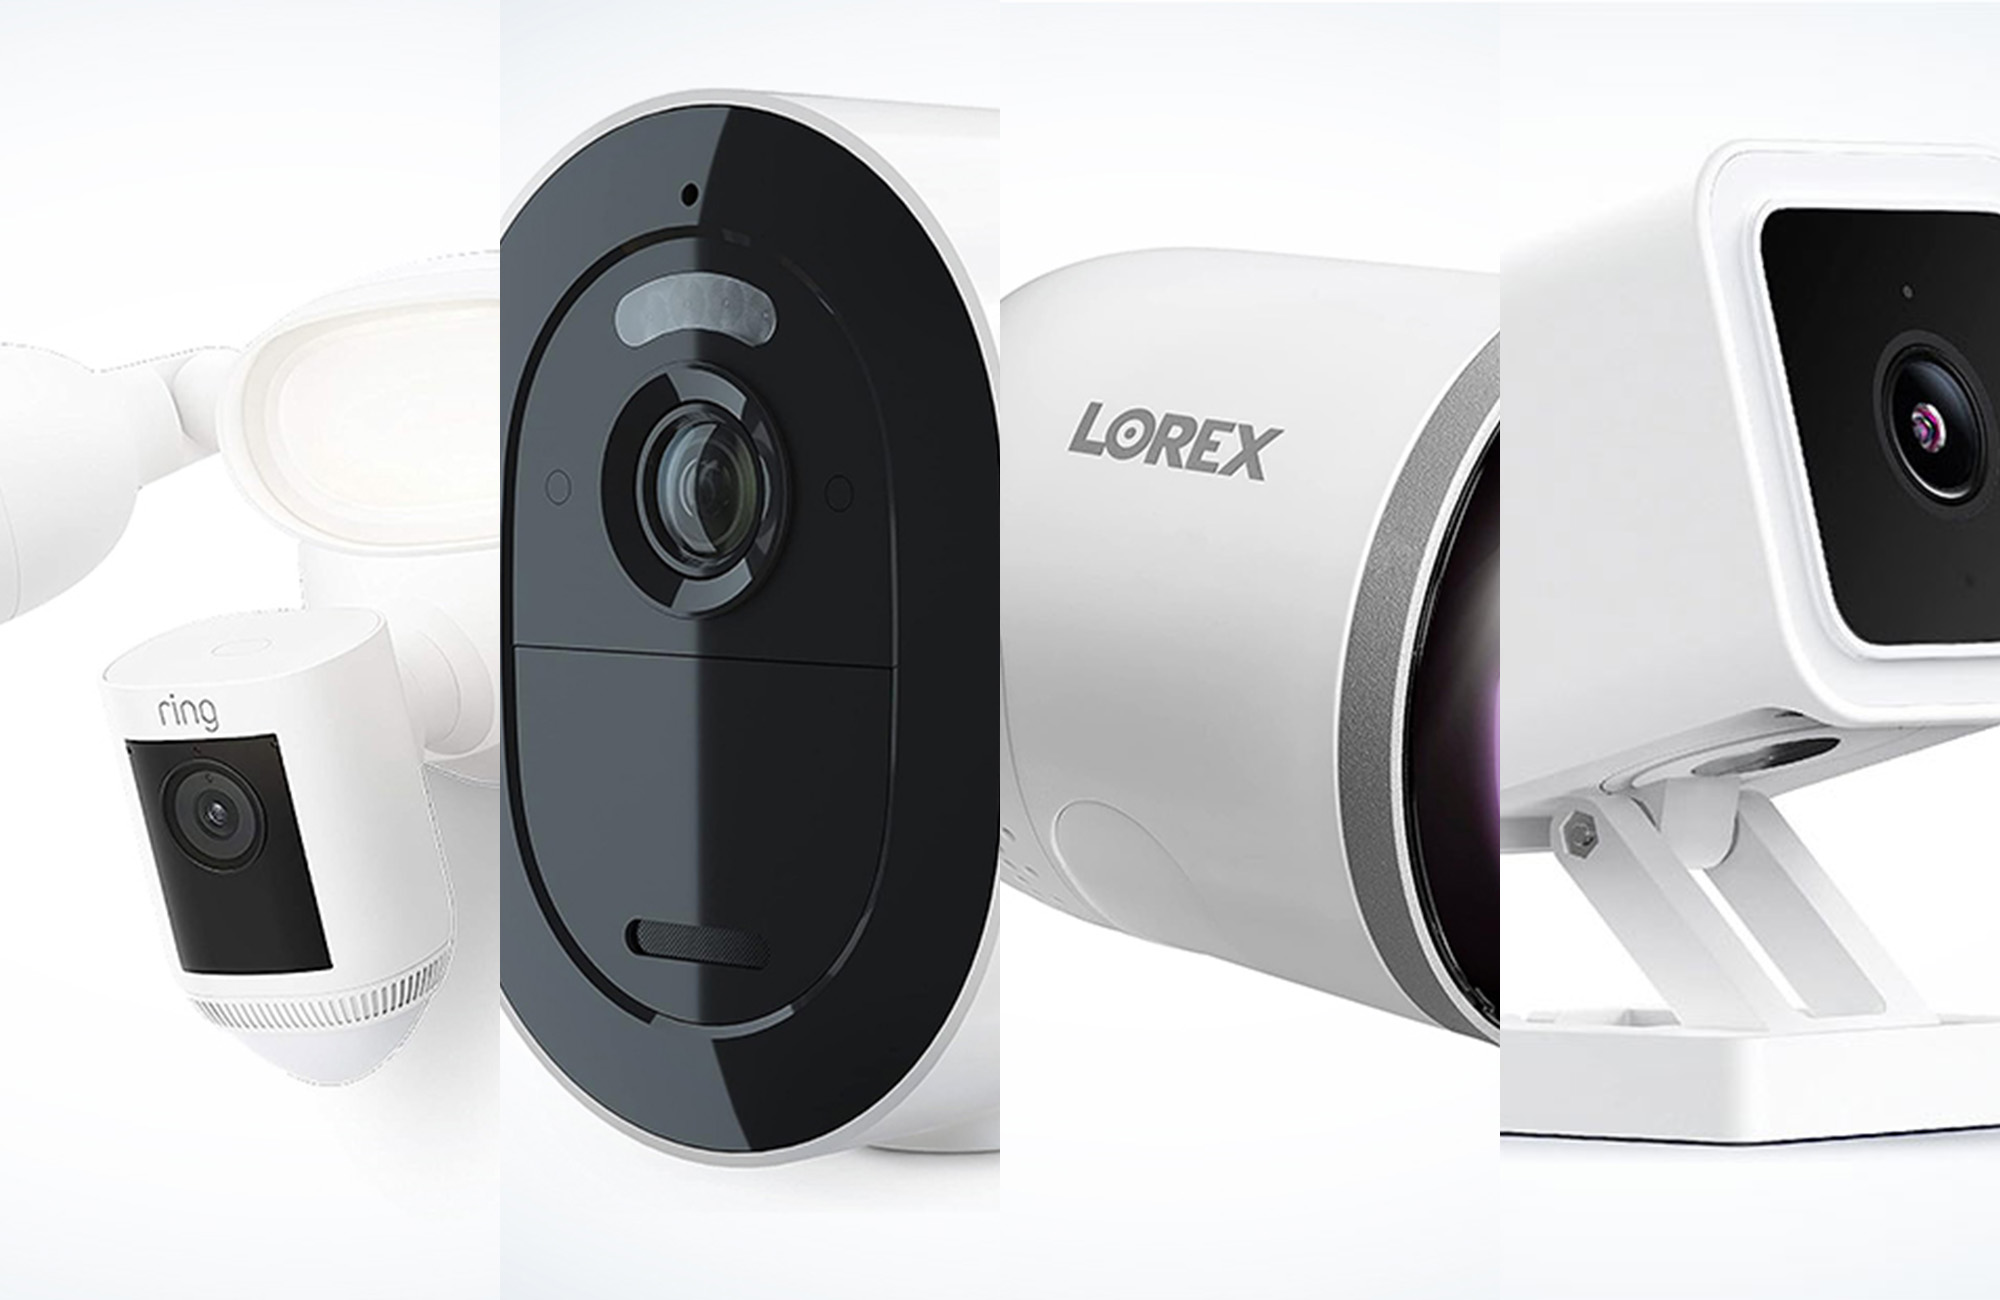 Introducing Ring Stick Up Cam Pro Battery Two-Way Talk with Audio+, 3D  Motion Detection with Bird's Eye Zones, 1080p HDR Video & Color Night Vision